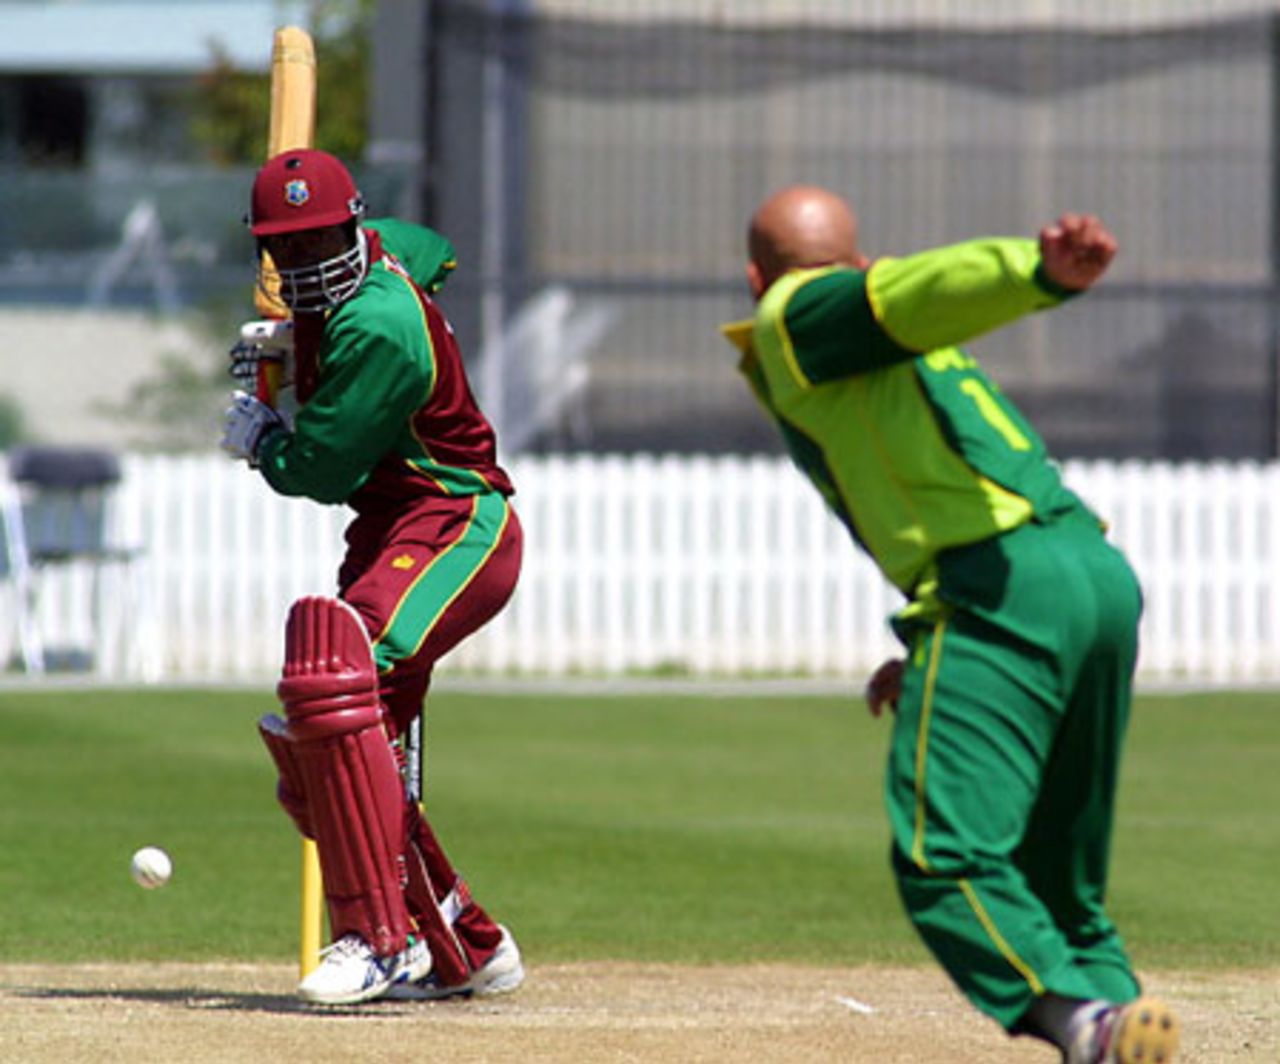 West Indies Under-19 batsman Donovan Pagon shapes to play a delivery from Pakistan Under-19 bowler Junaid Zia during his innings of 47. ICC Under-19 World Cup Super League Group 1: Pakistan Under-19s v West Indies Under-19s at Lincoln Green, Lincoln, 29 January 2002.